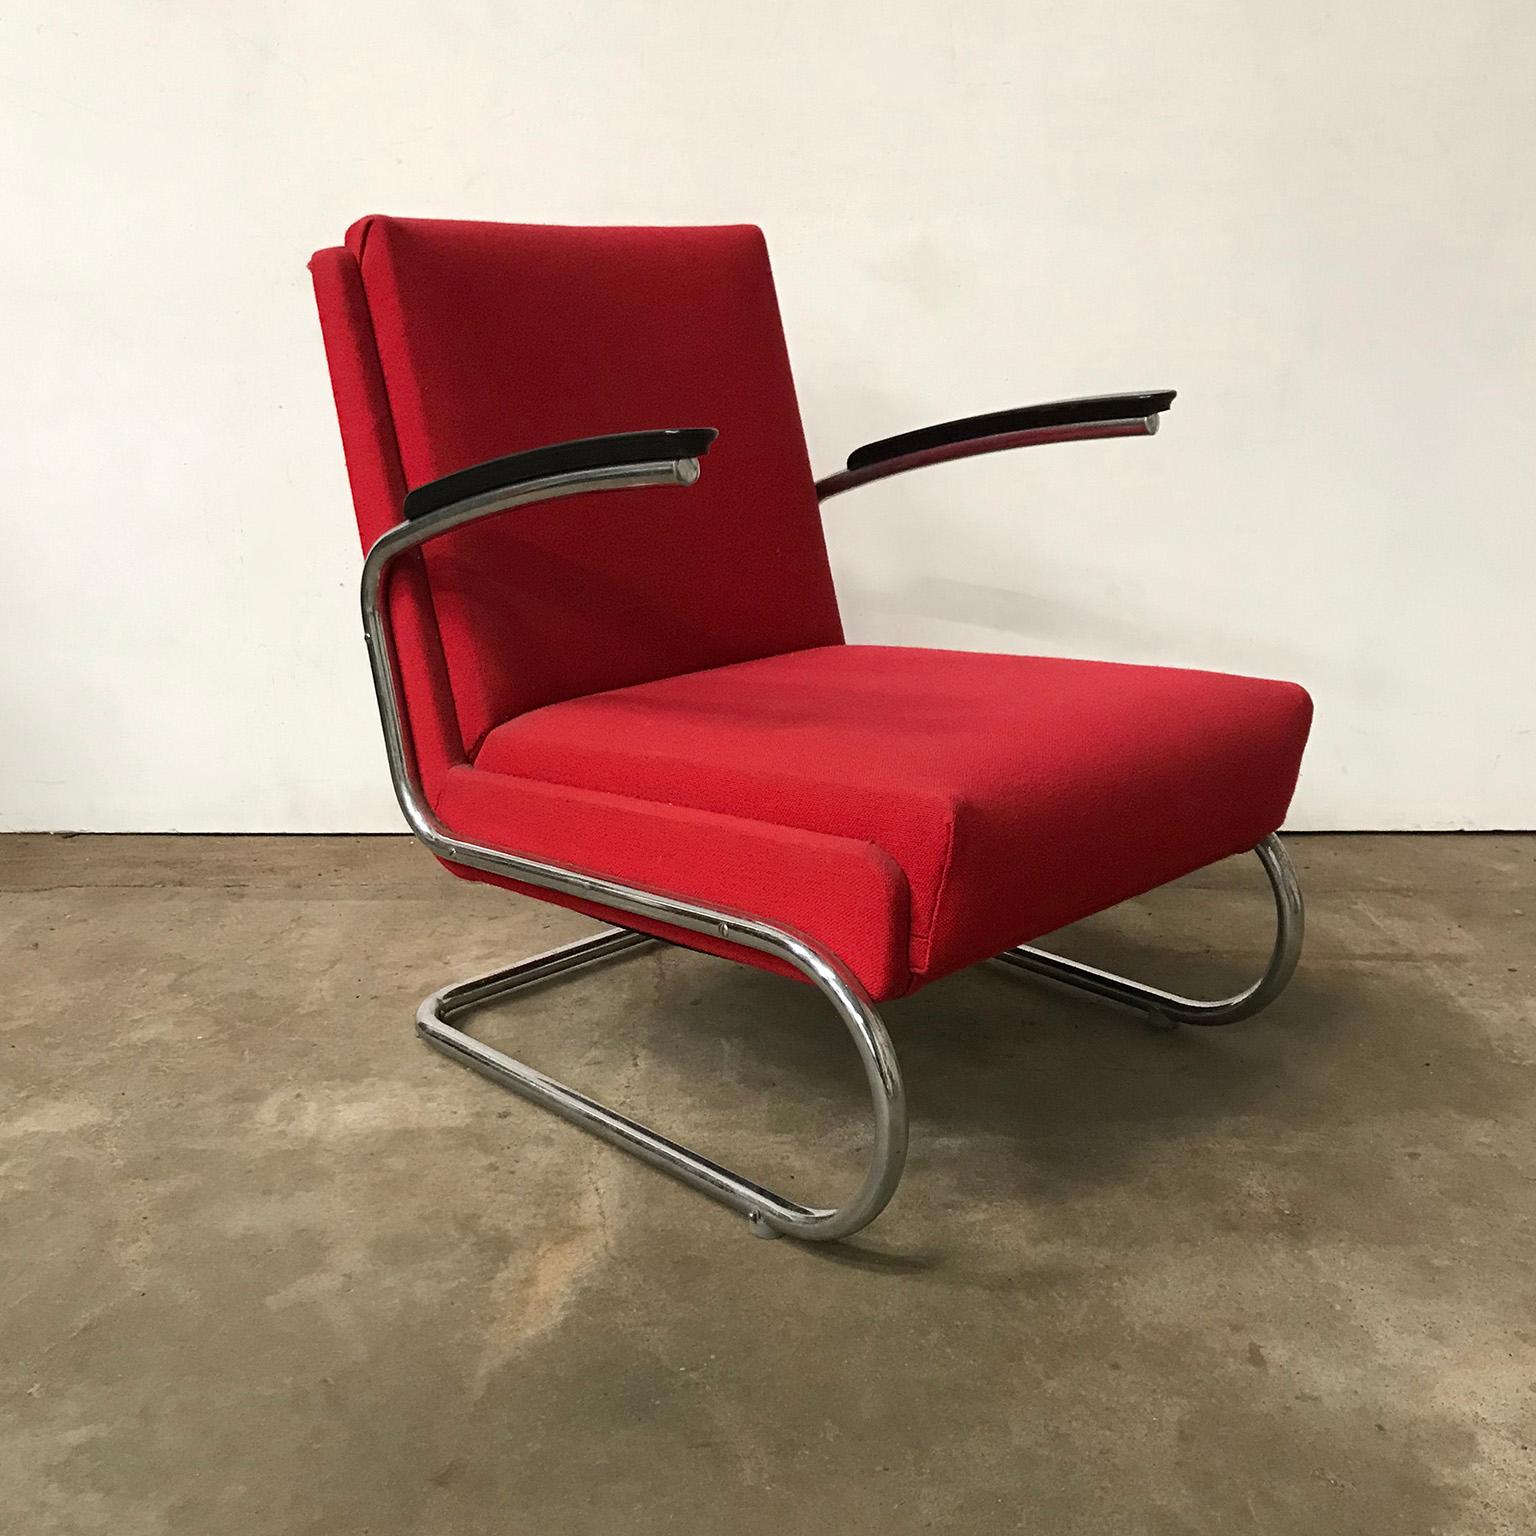 Tubular easy chair in burgundy red and black armrests. This beautiful easy chair is out of one tube. The upholstery is in a burgundy raspberry red and in good condition although it shows some traces of wear like in the top right and left corner on